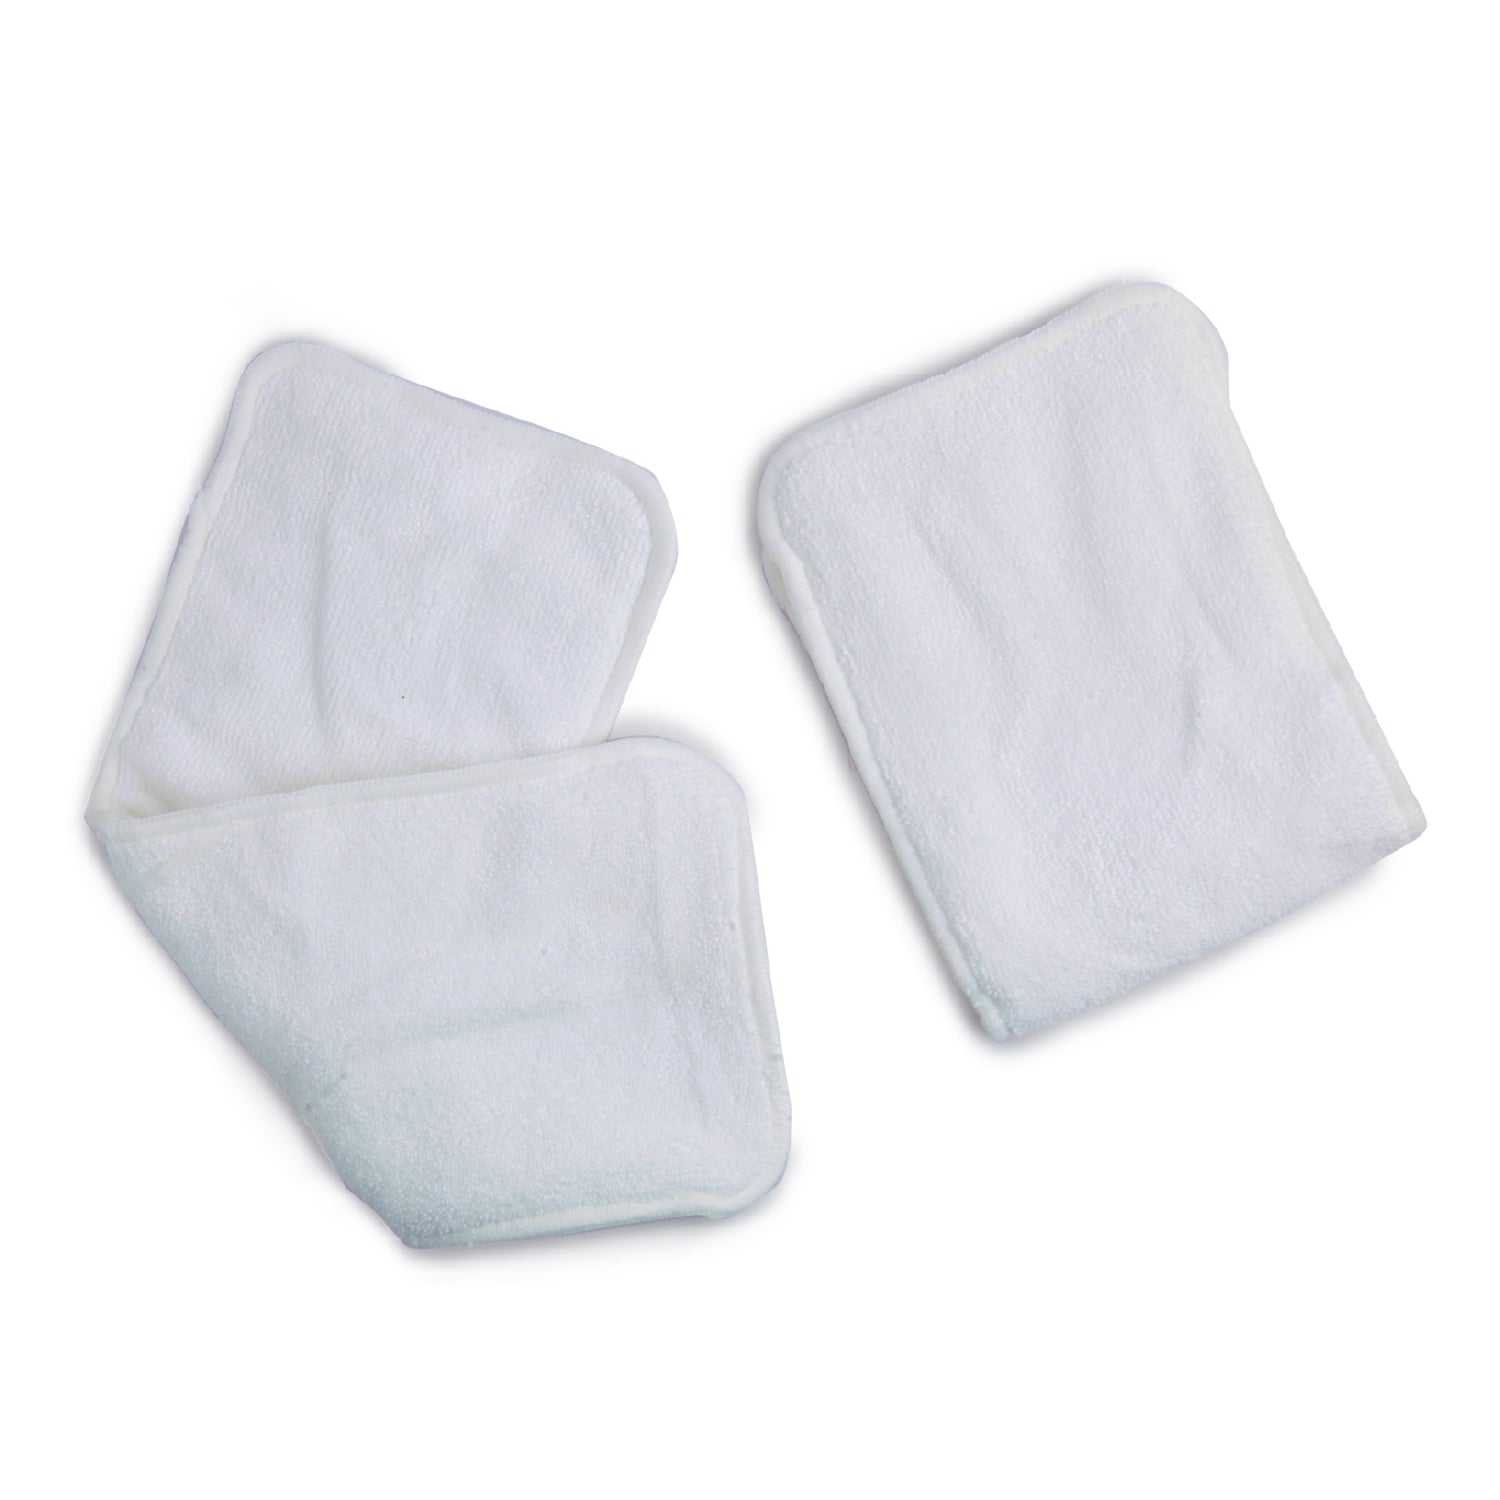 Super Soft White 2 Pk Diaper Liners - Baby Moo